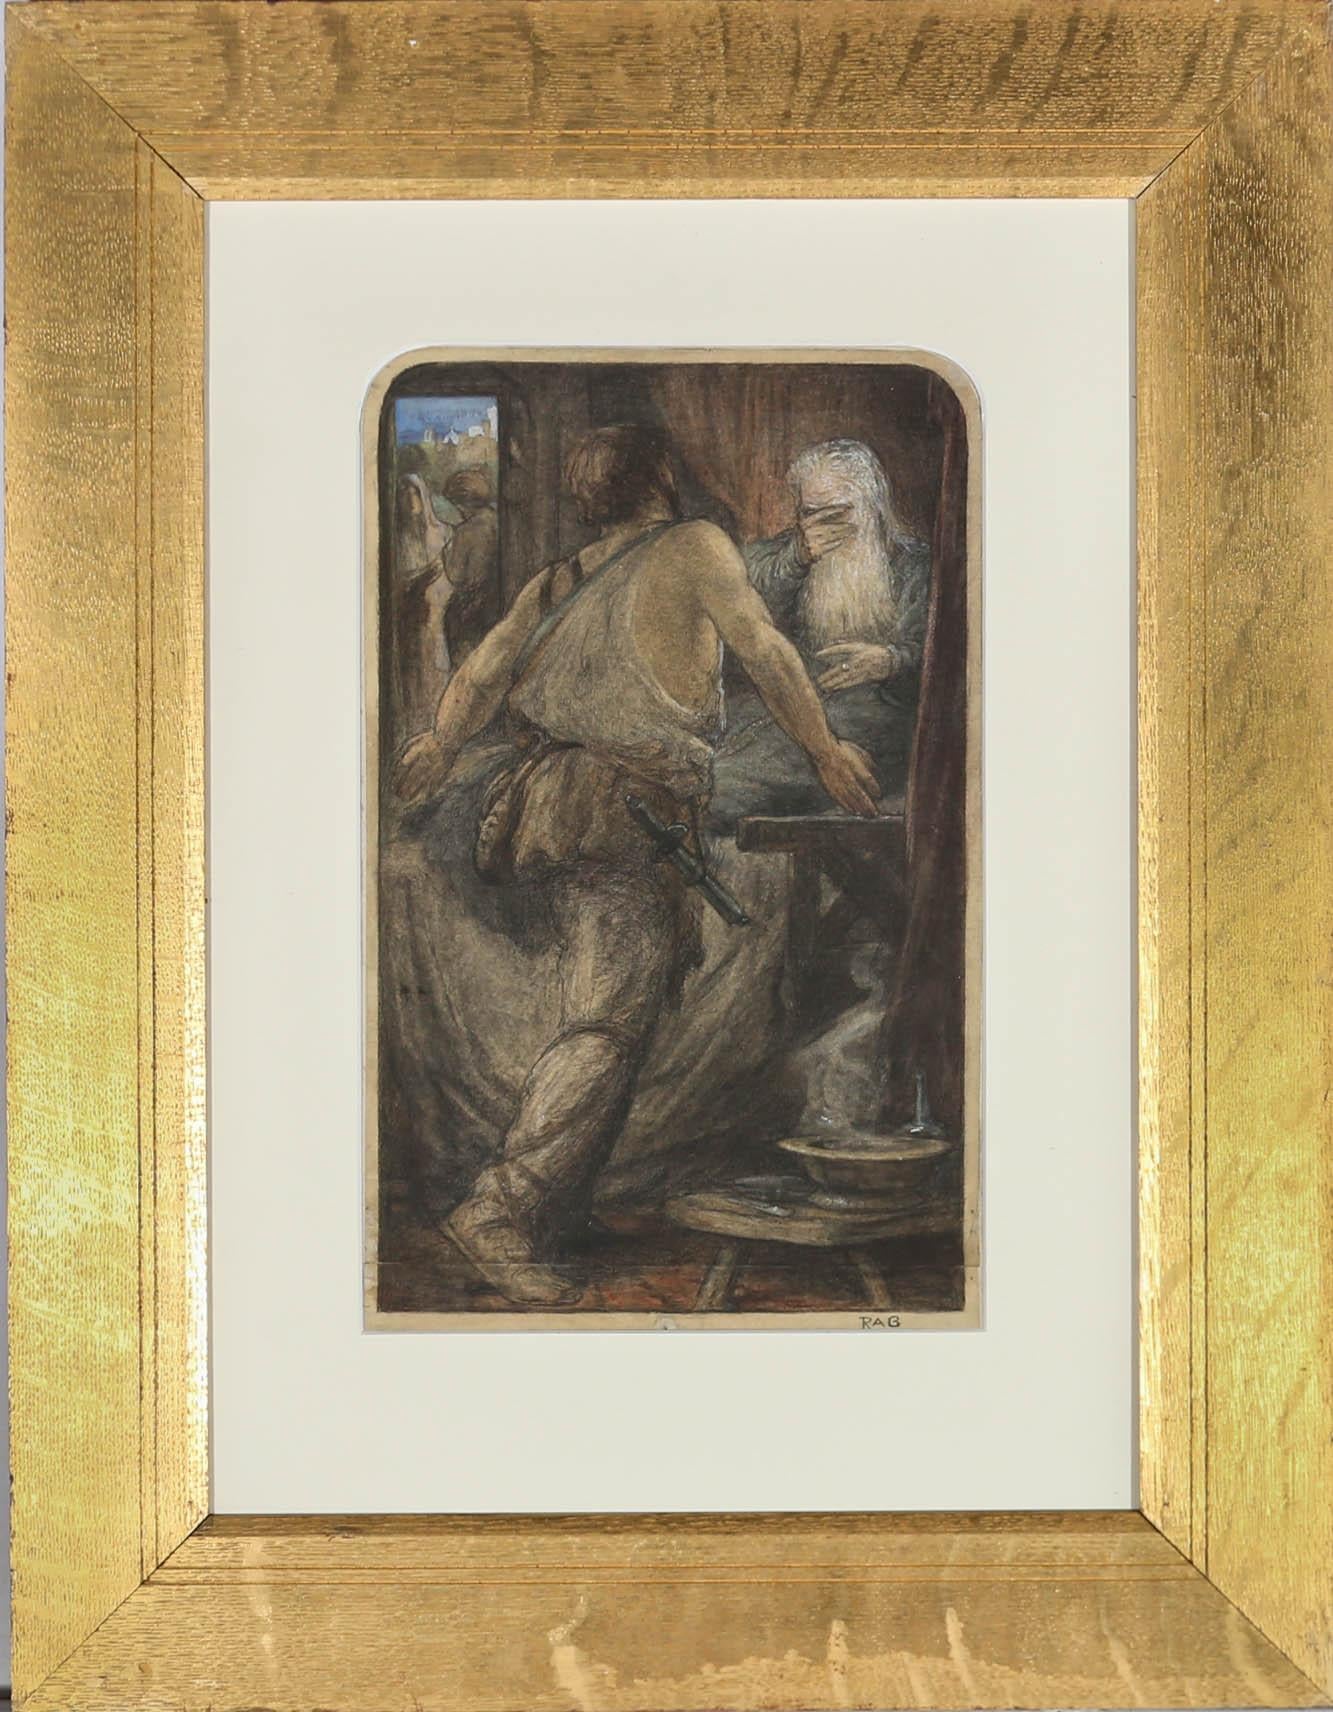 A striking, unidentified Biblical scene in pencil and watercolour, showing a man with a dagger in his sheath at his side, aggressively approaching an older man who hides his face. A bowl of frankincense burns to the right and in the background an